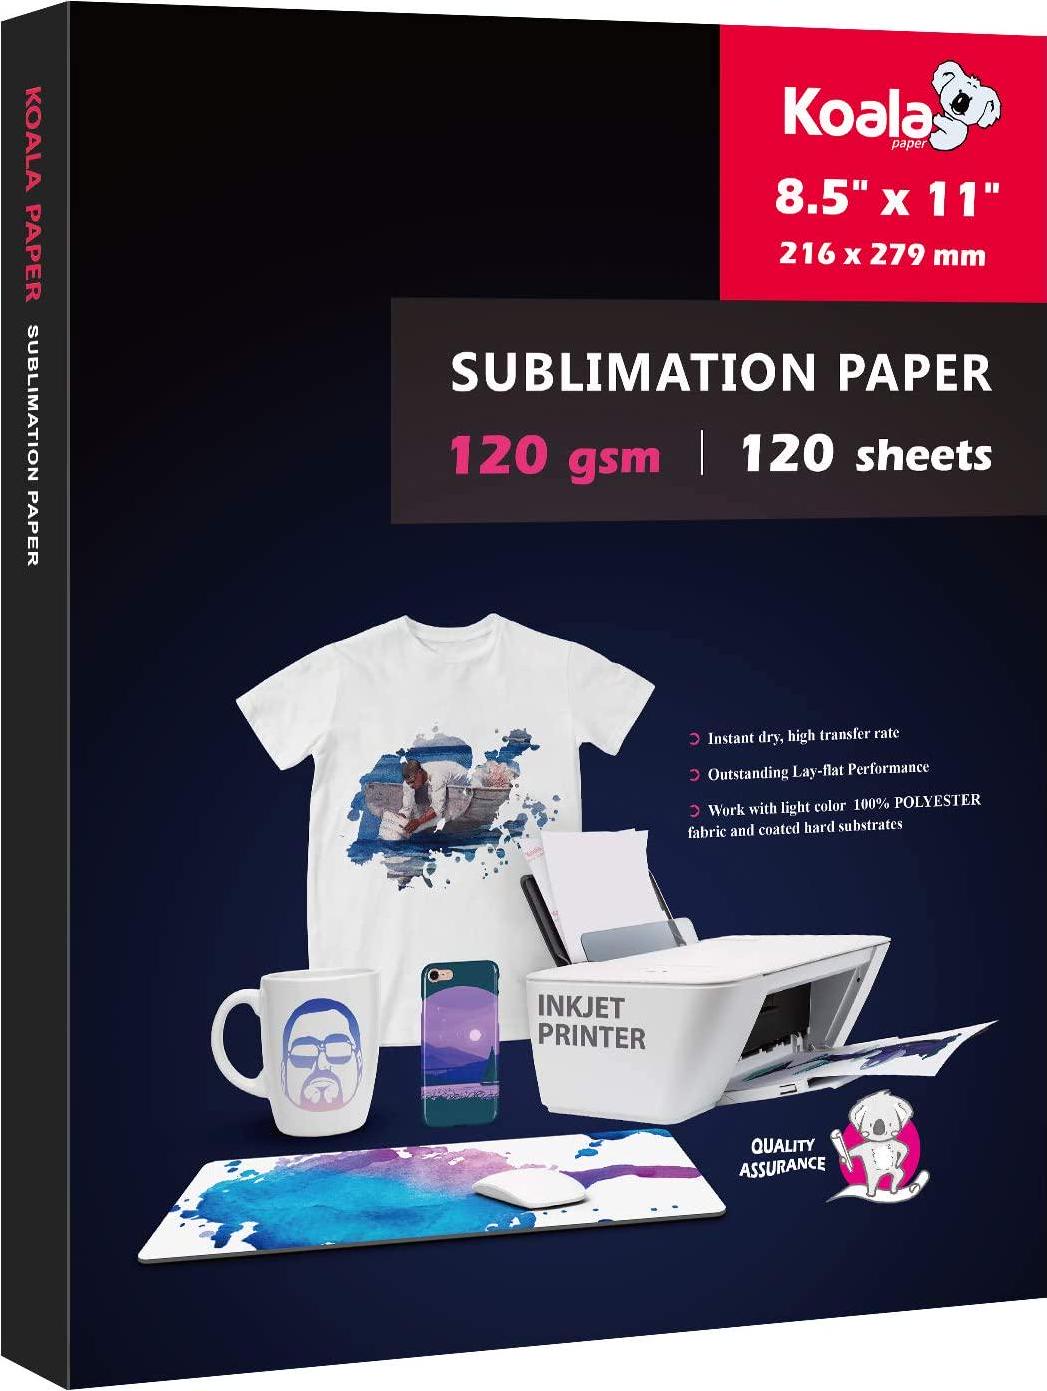 KOALA PAPER, Koala 120 Sheets Sublimation Paper 8.5x11 for Heat Transfer DIY Gift Compatible with Epson Sawgrass Ricoh HP Canon Inkjet Printer with Sublimation Ink